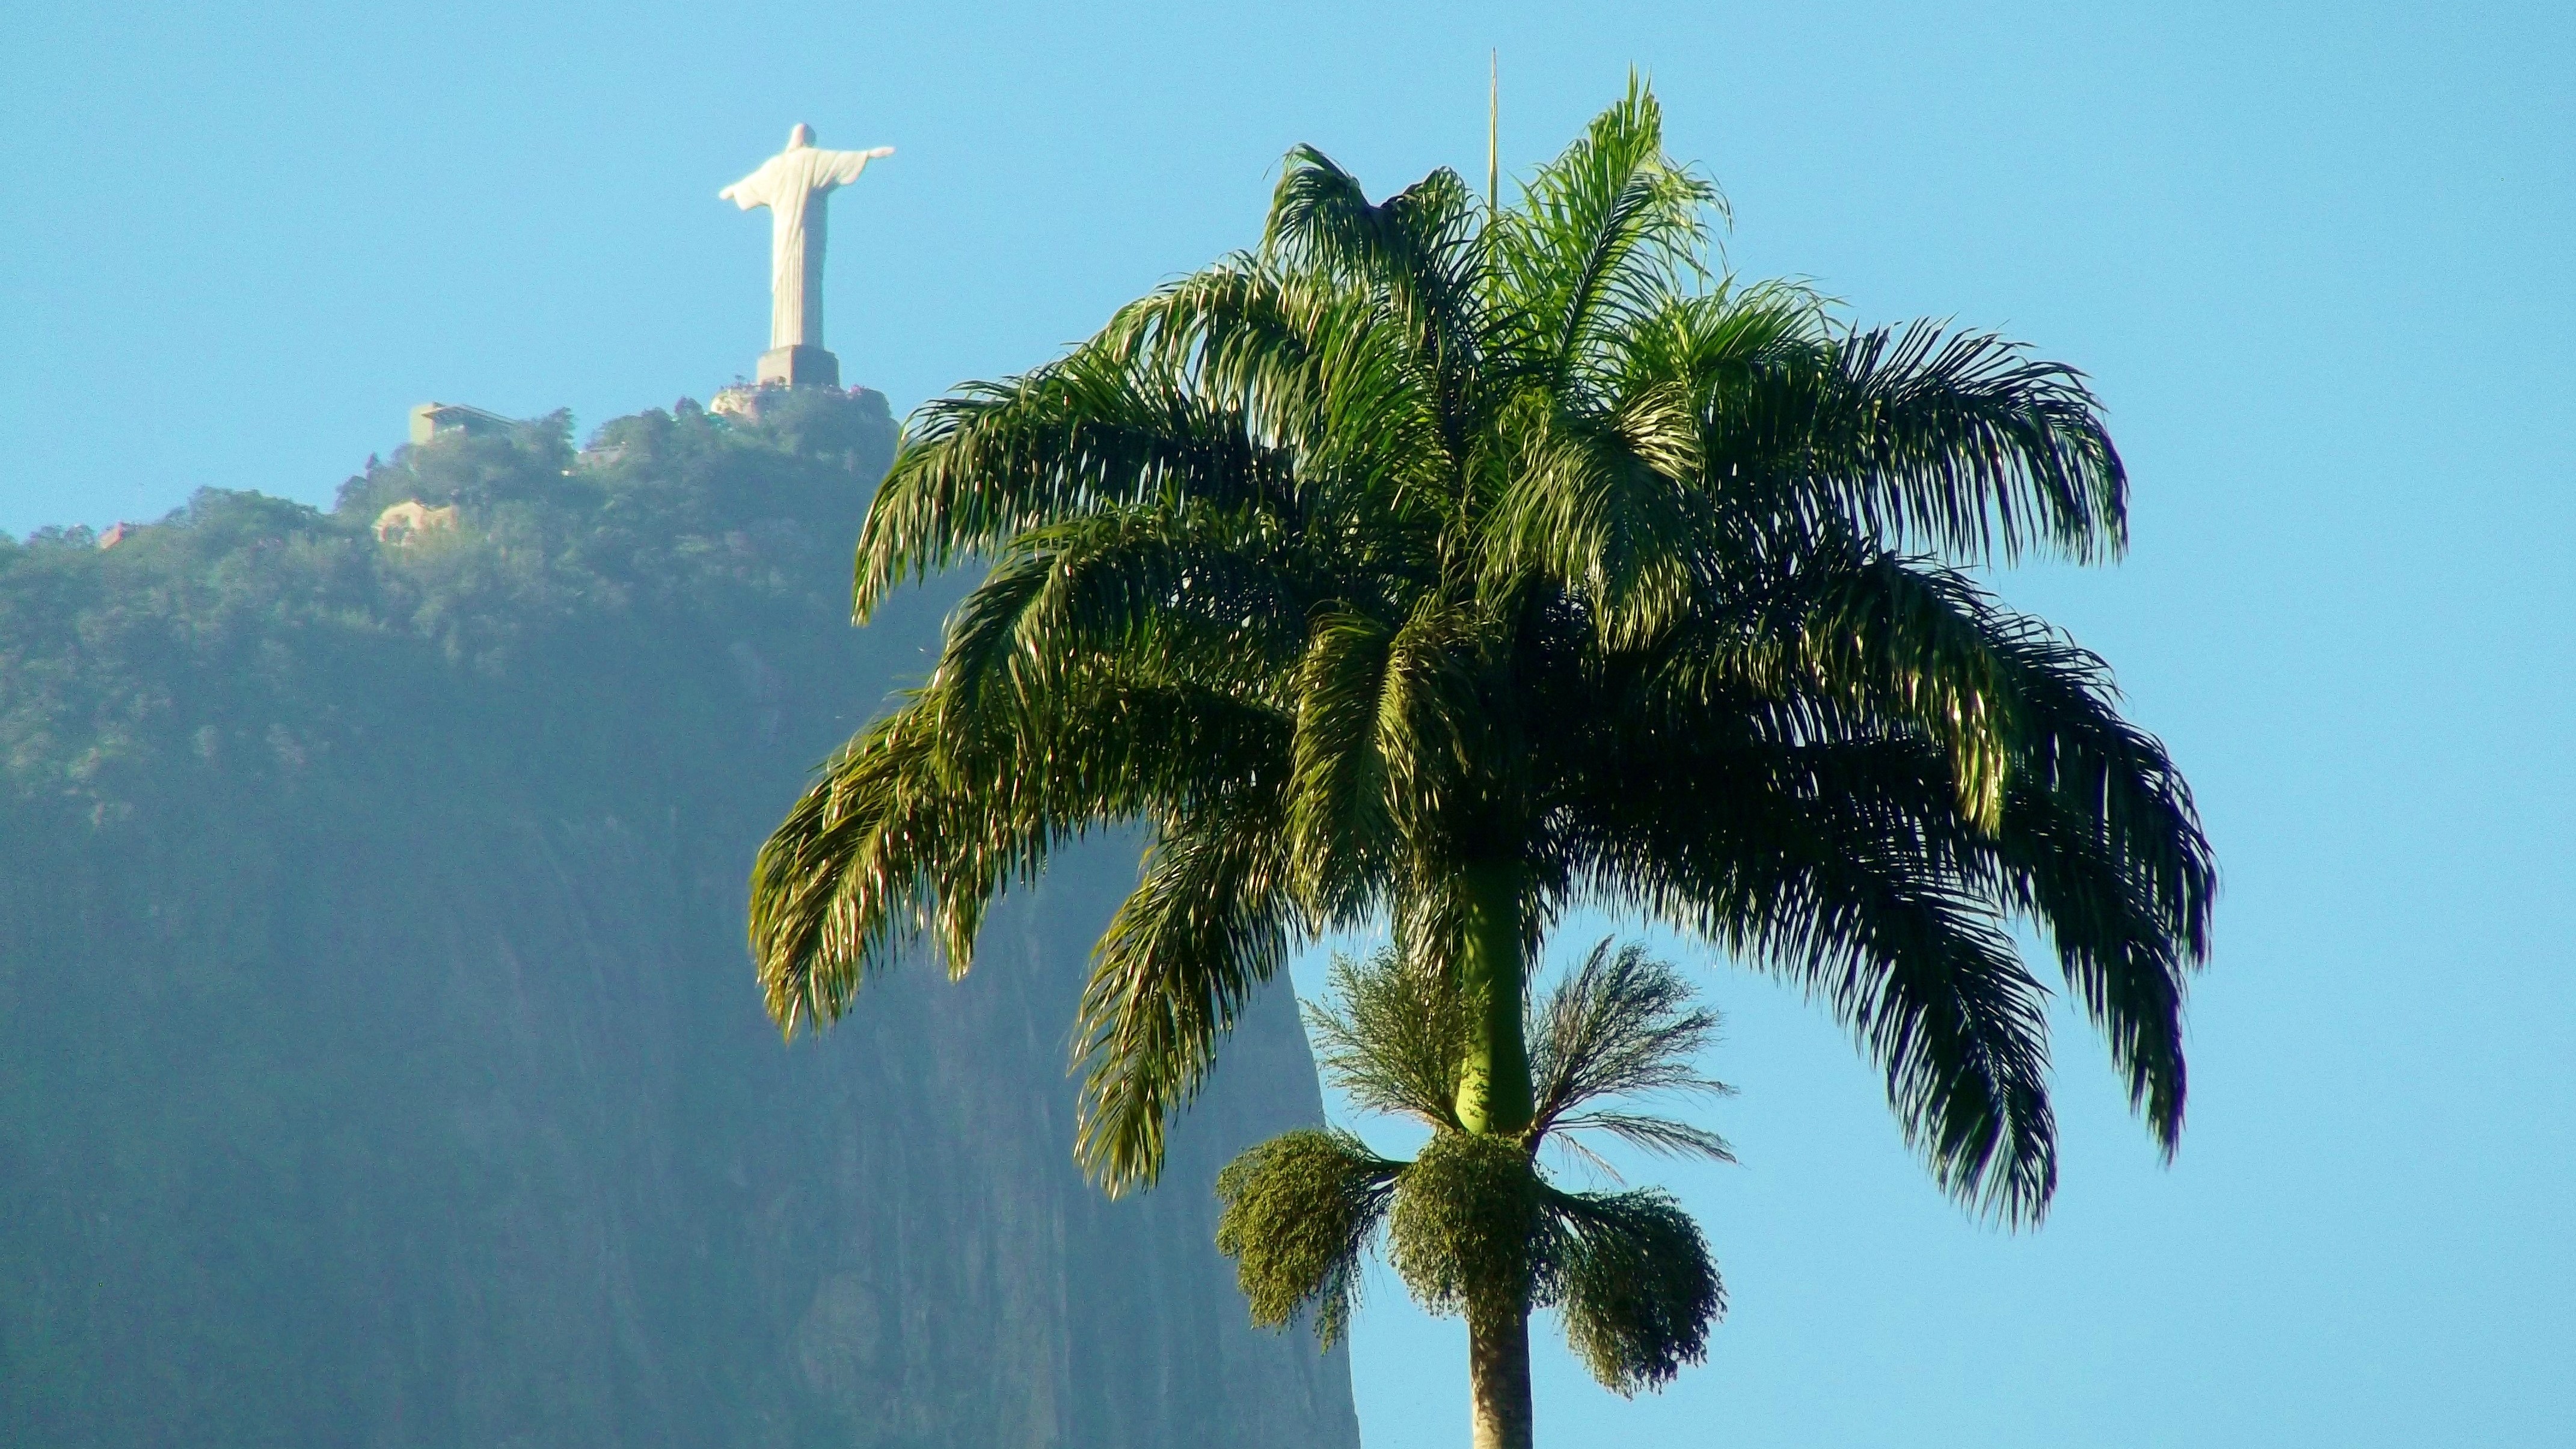 In the foreground, a palm tree. In the background, the Christ the Redeemer statue in Rio de Janeiro